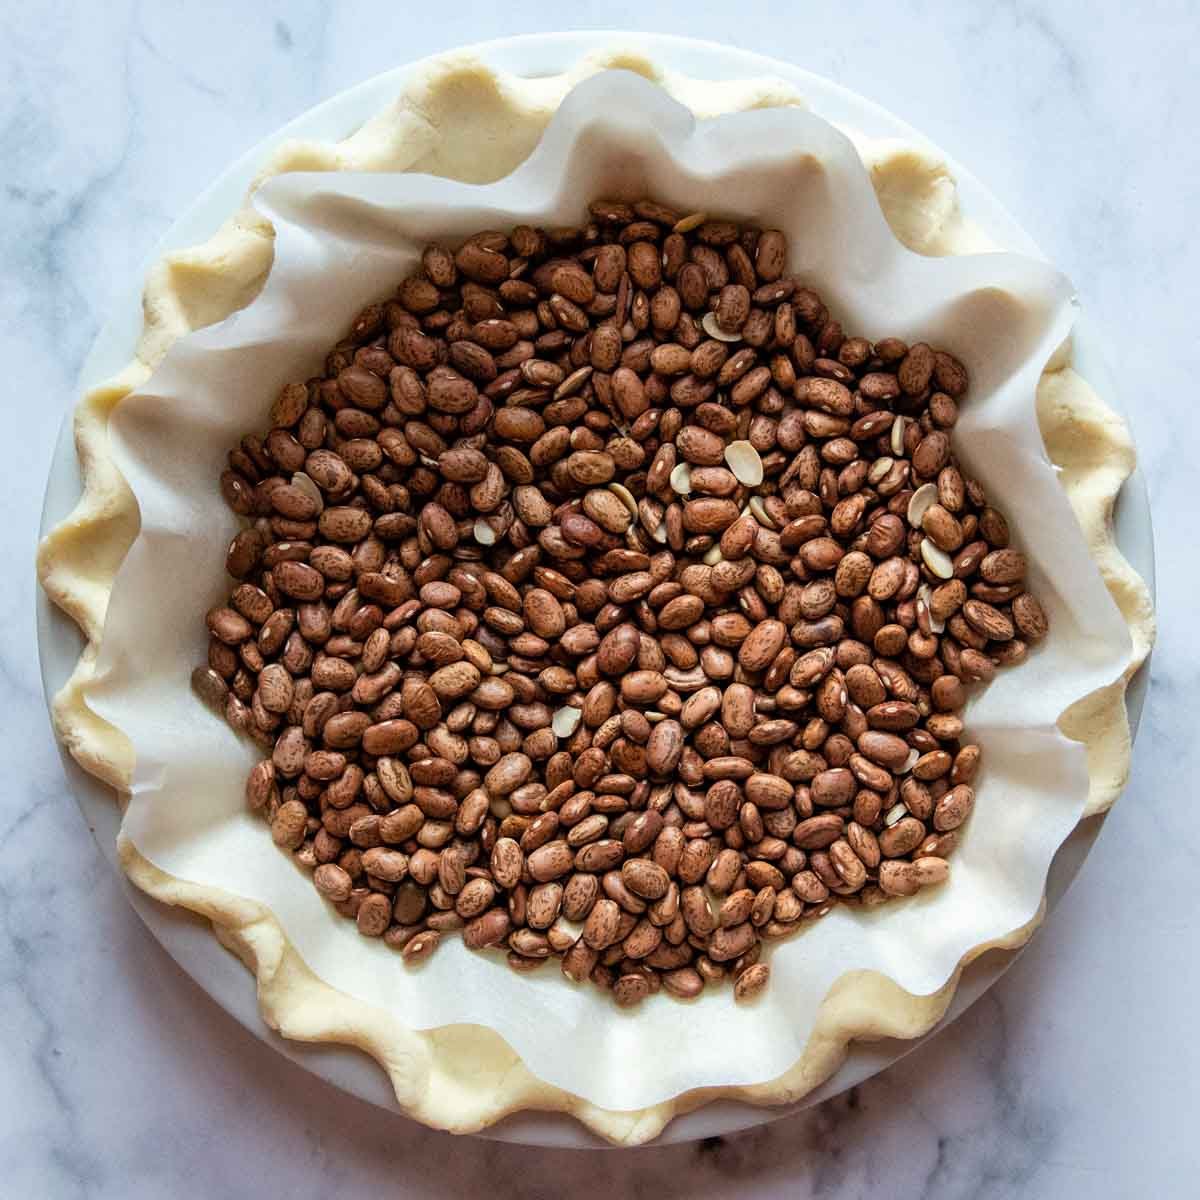 dried beans in an unbaked pie crust.